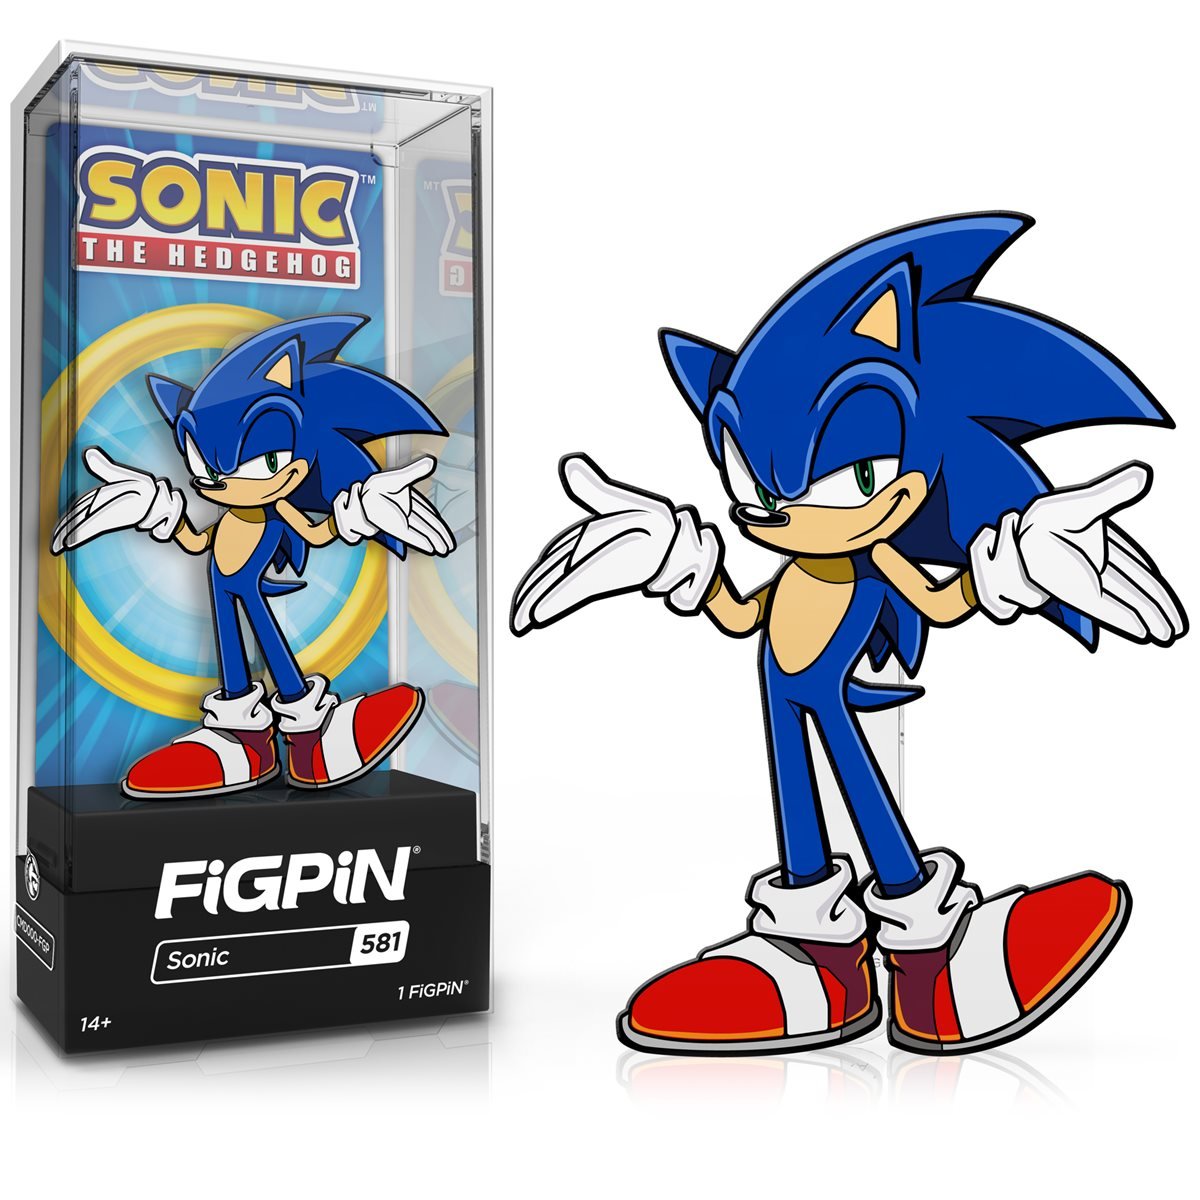 FiGPiN Sonic the Hedgehog